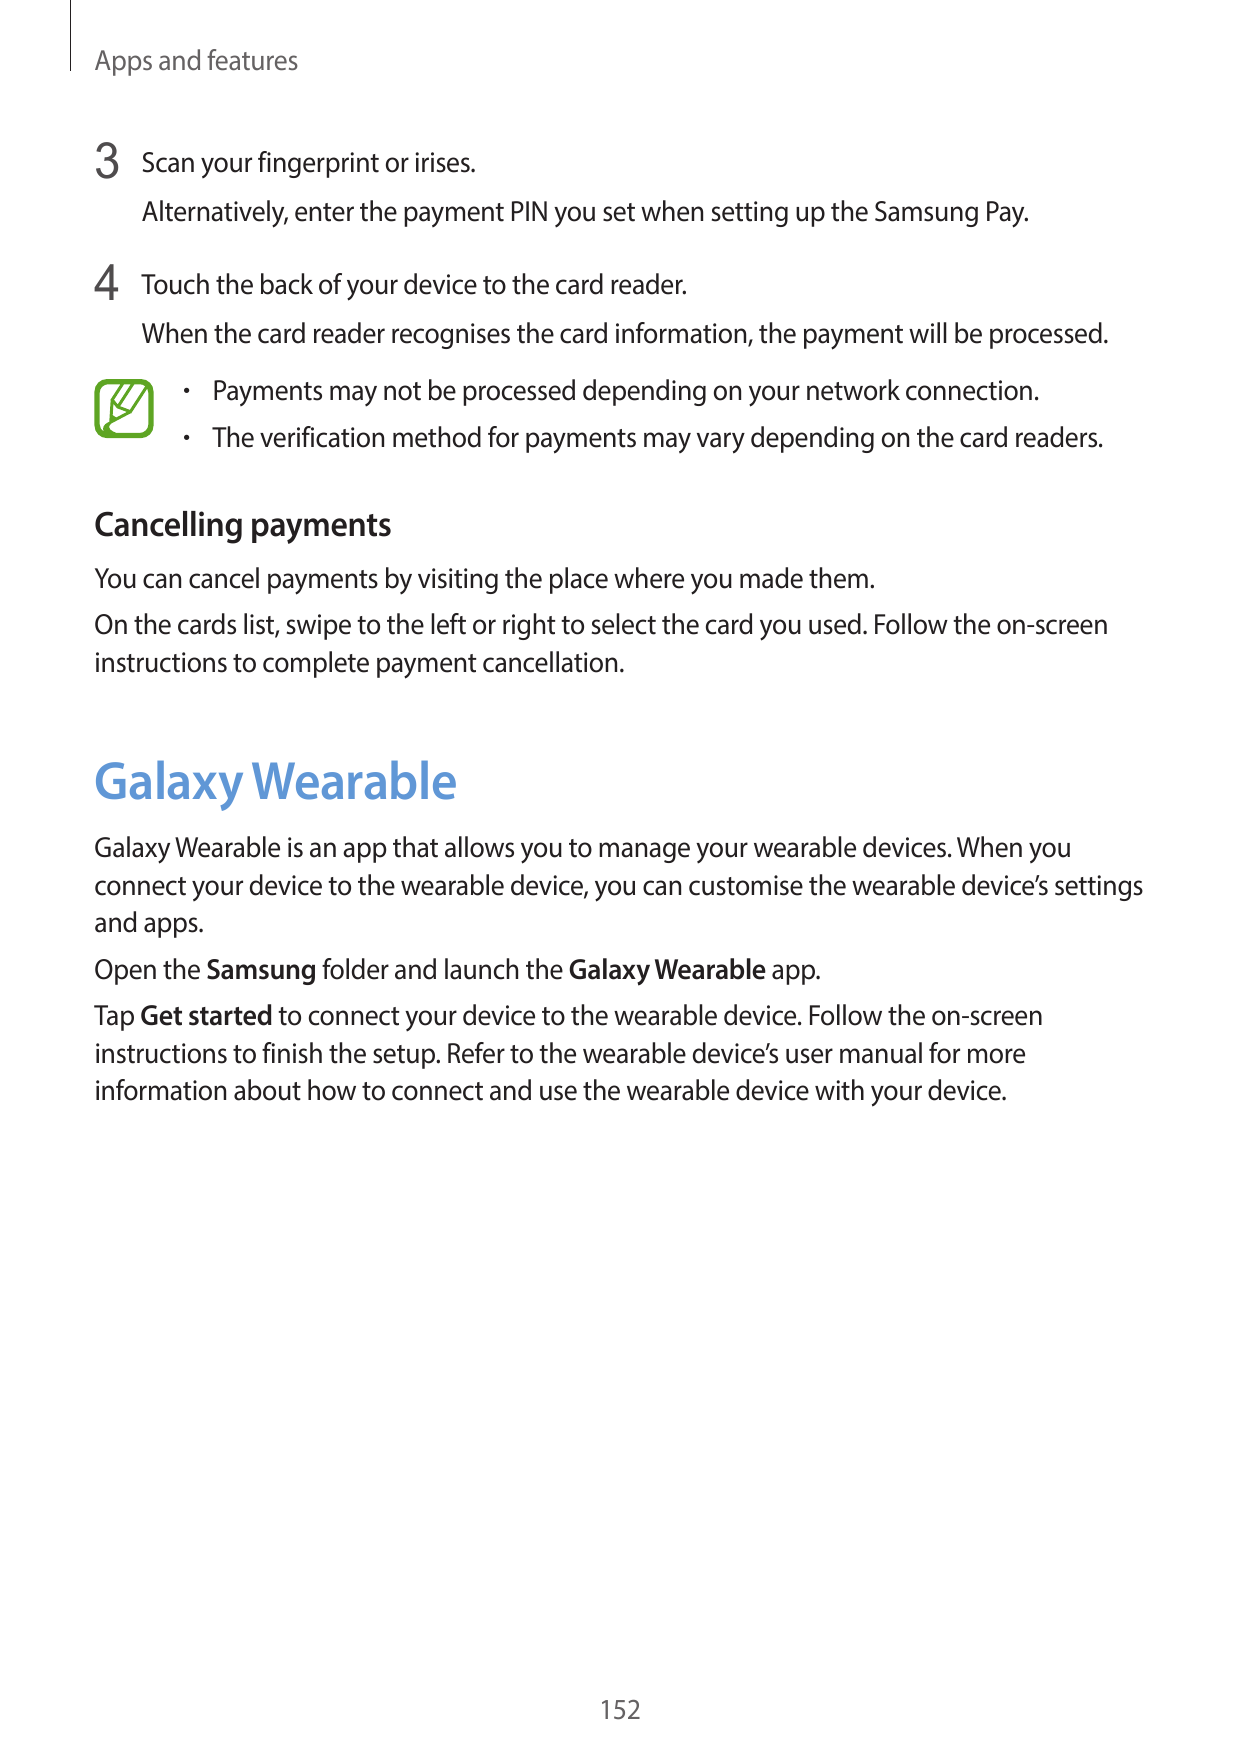 Apps and features3 Scan your fingerprint or irises.Alternatively, enter the payment PIN you set when setting up the Samsung Pay.